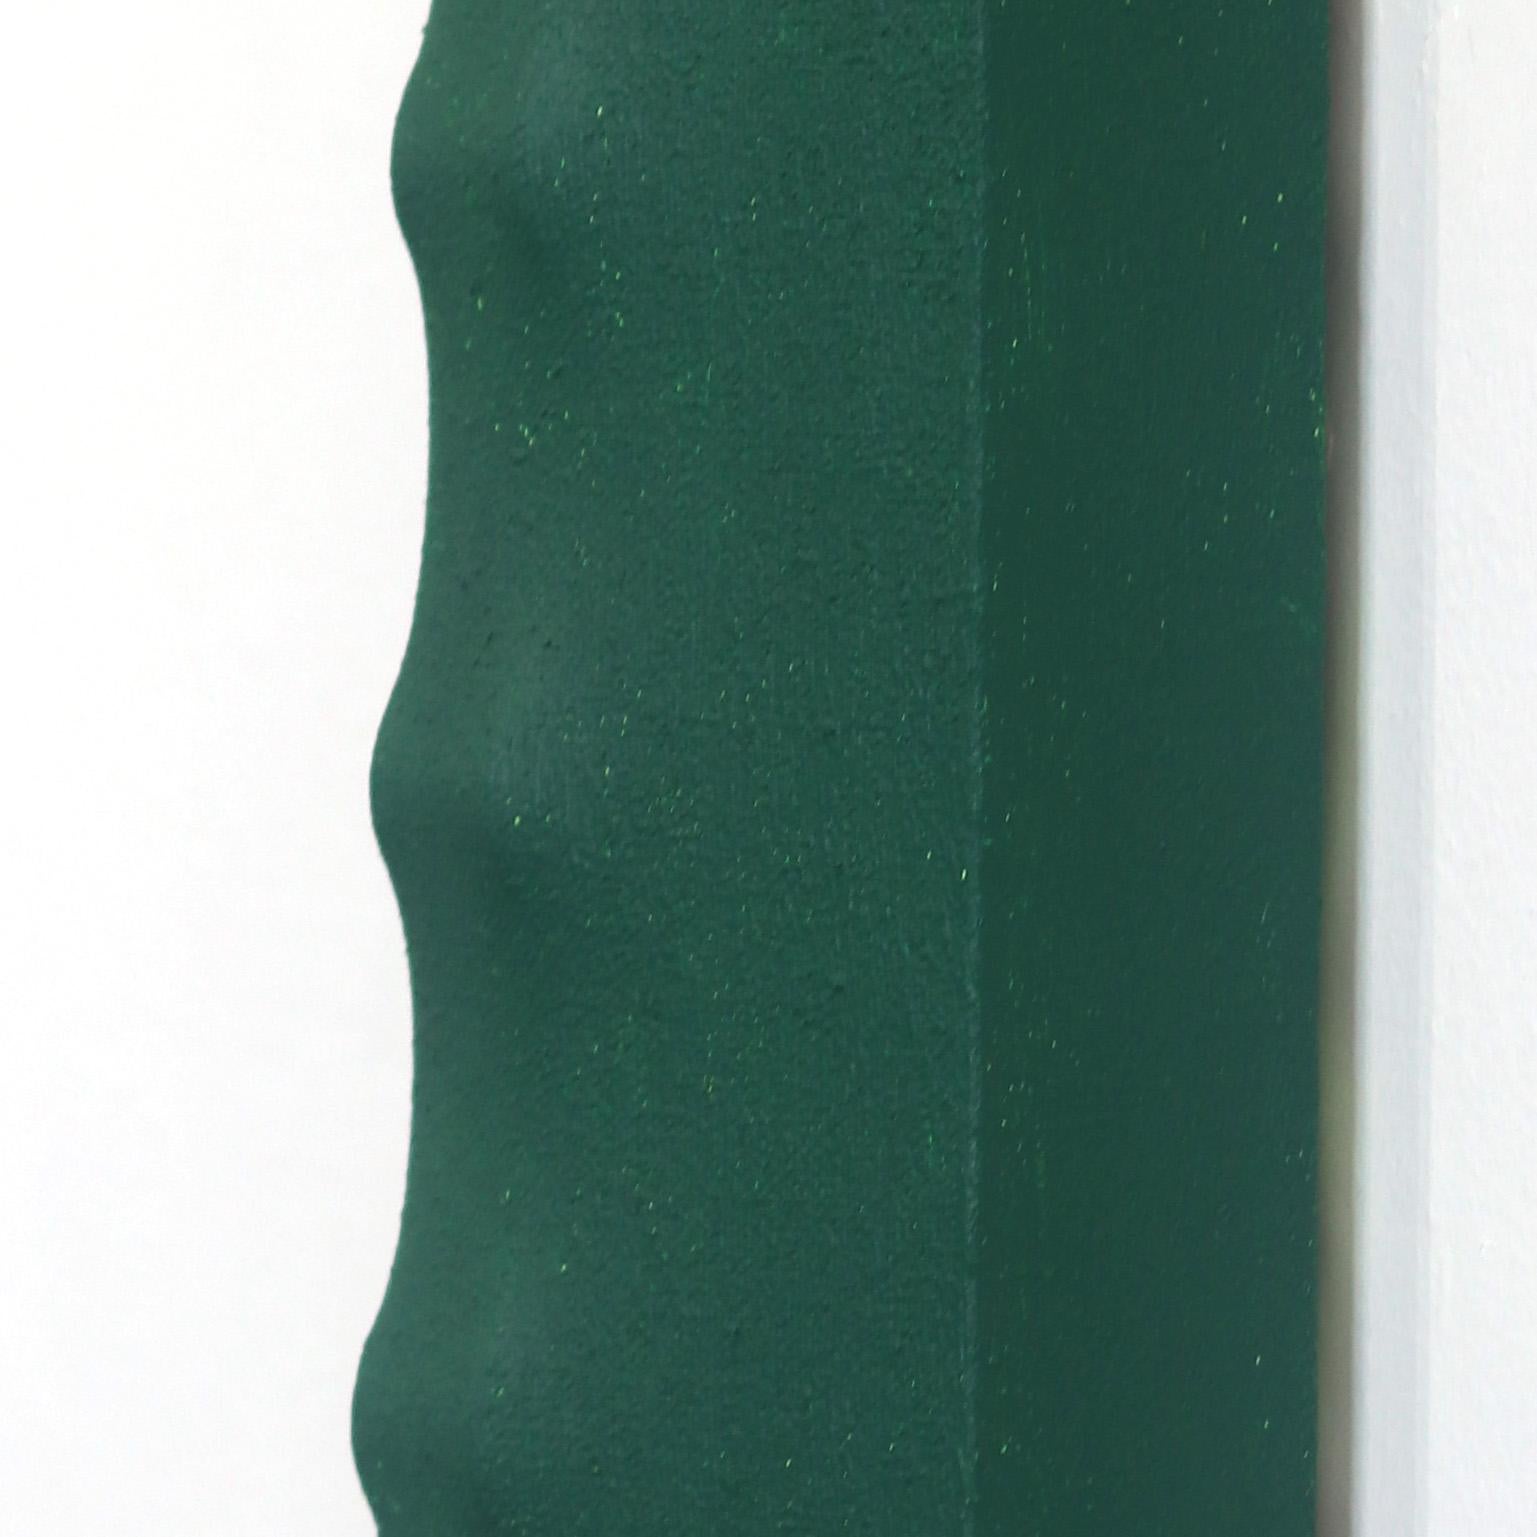 SBLGF - Three-dimensional Minimalist Green Sculptural Abstract Painting For Sale 1